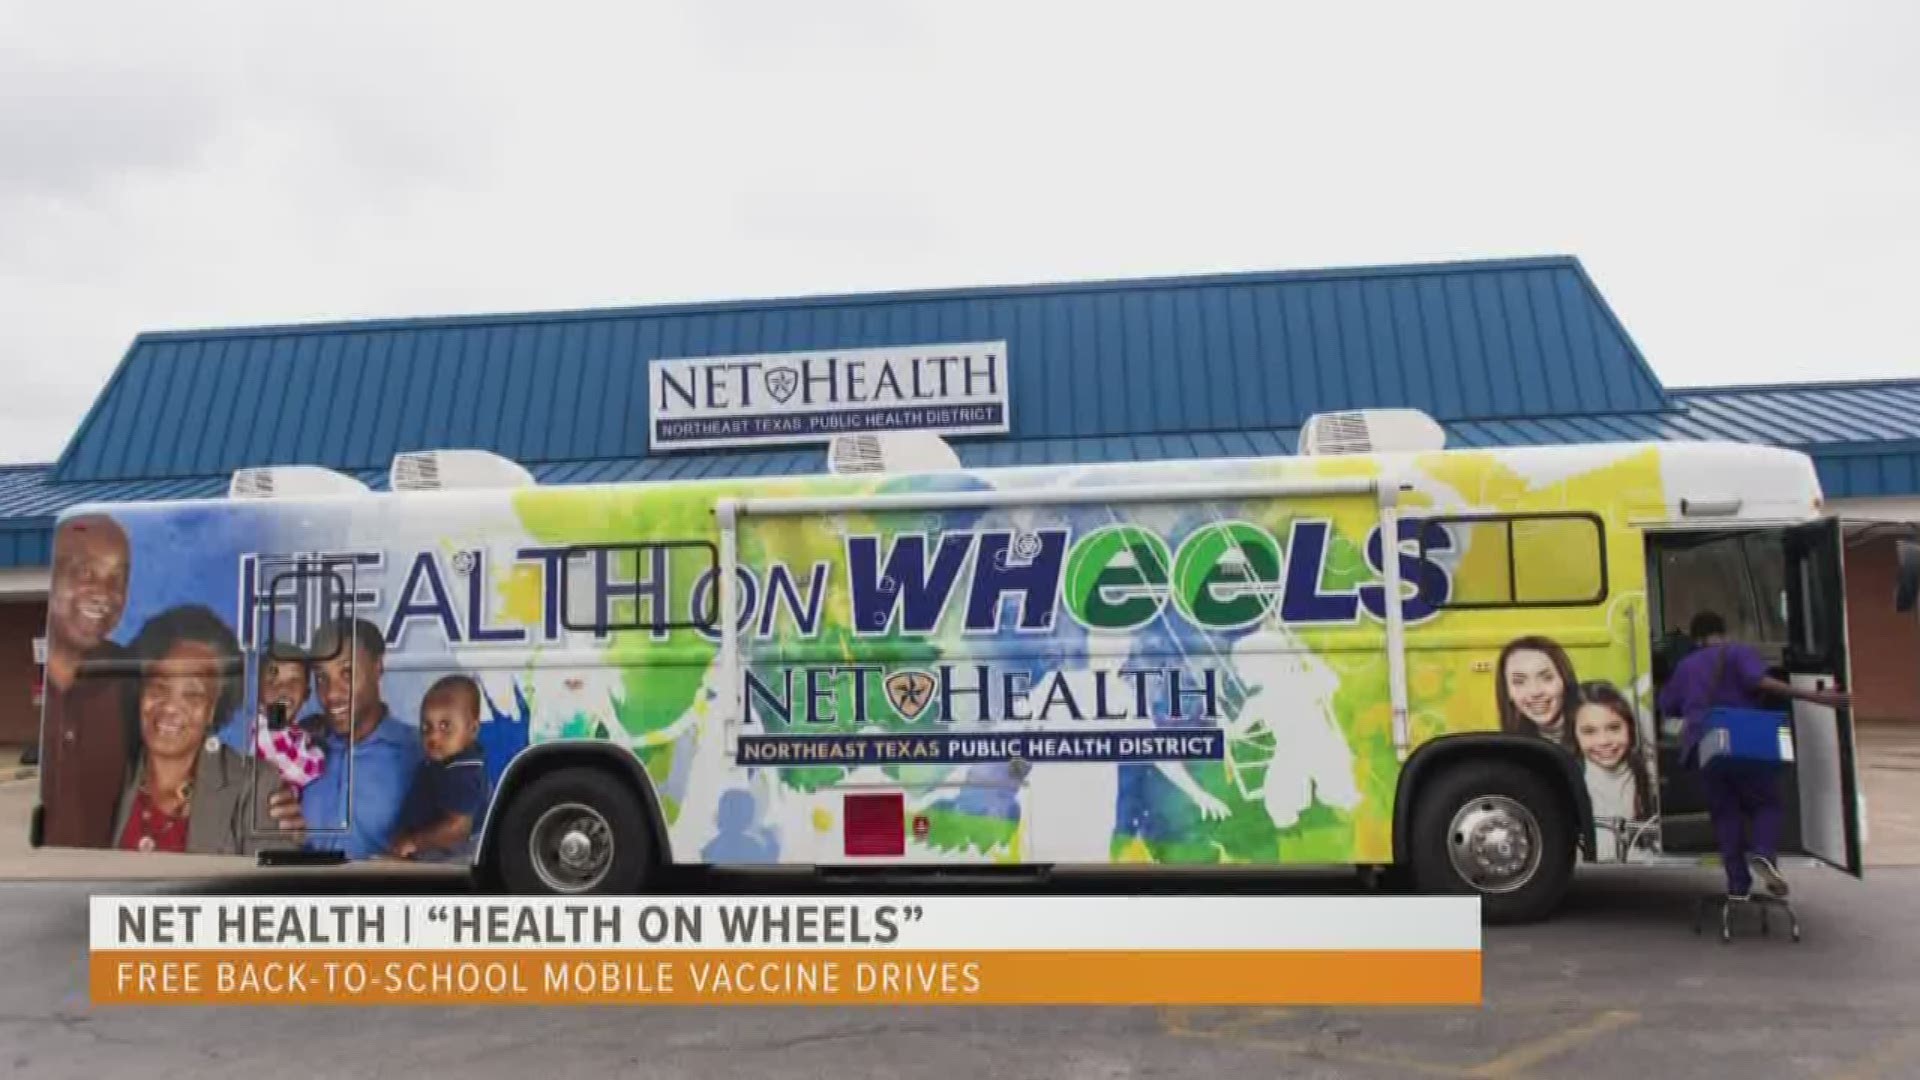 The Northeast Texas Public Health District (NET Health) is going mobile and providing immunizations via “Health on Wheels.”